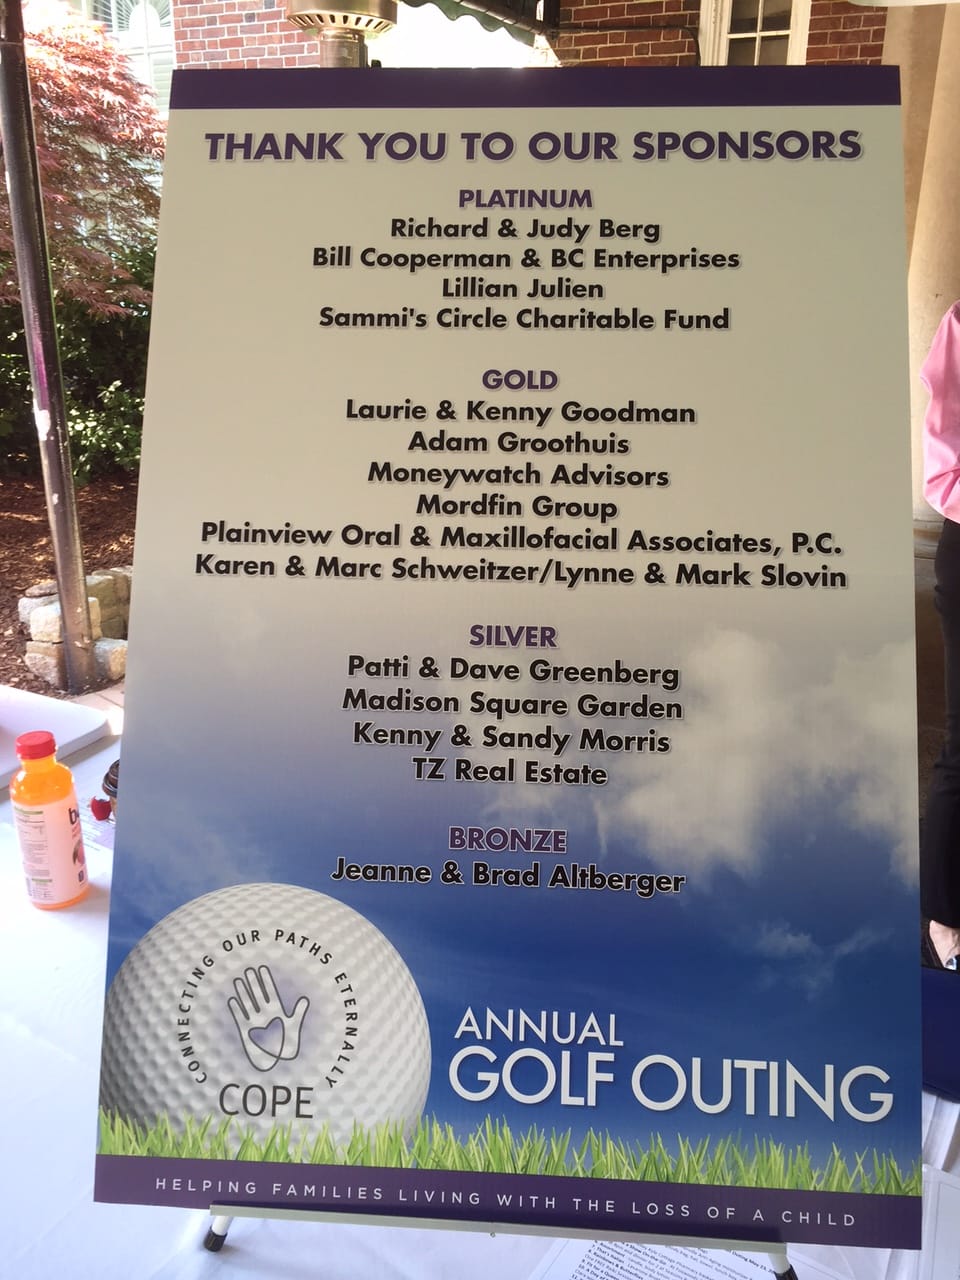 Photo of the hoarding board with a Thank You Message for all the Sponsors participating in Annual Golf Outing | COPE